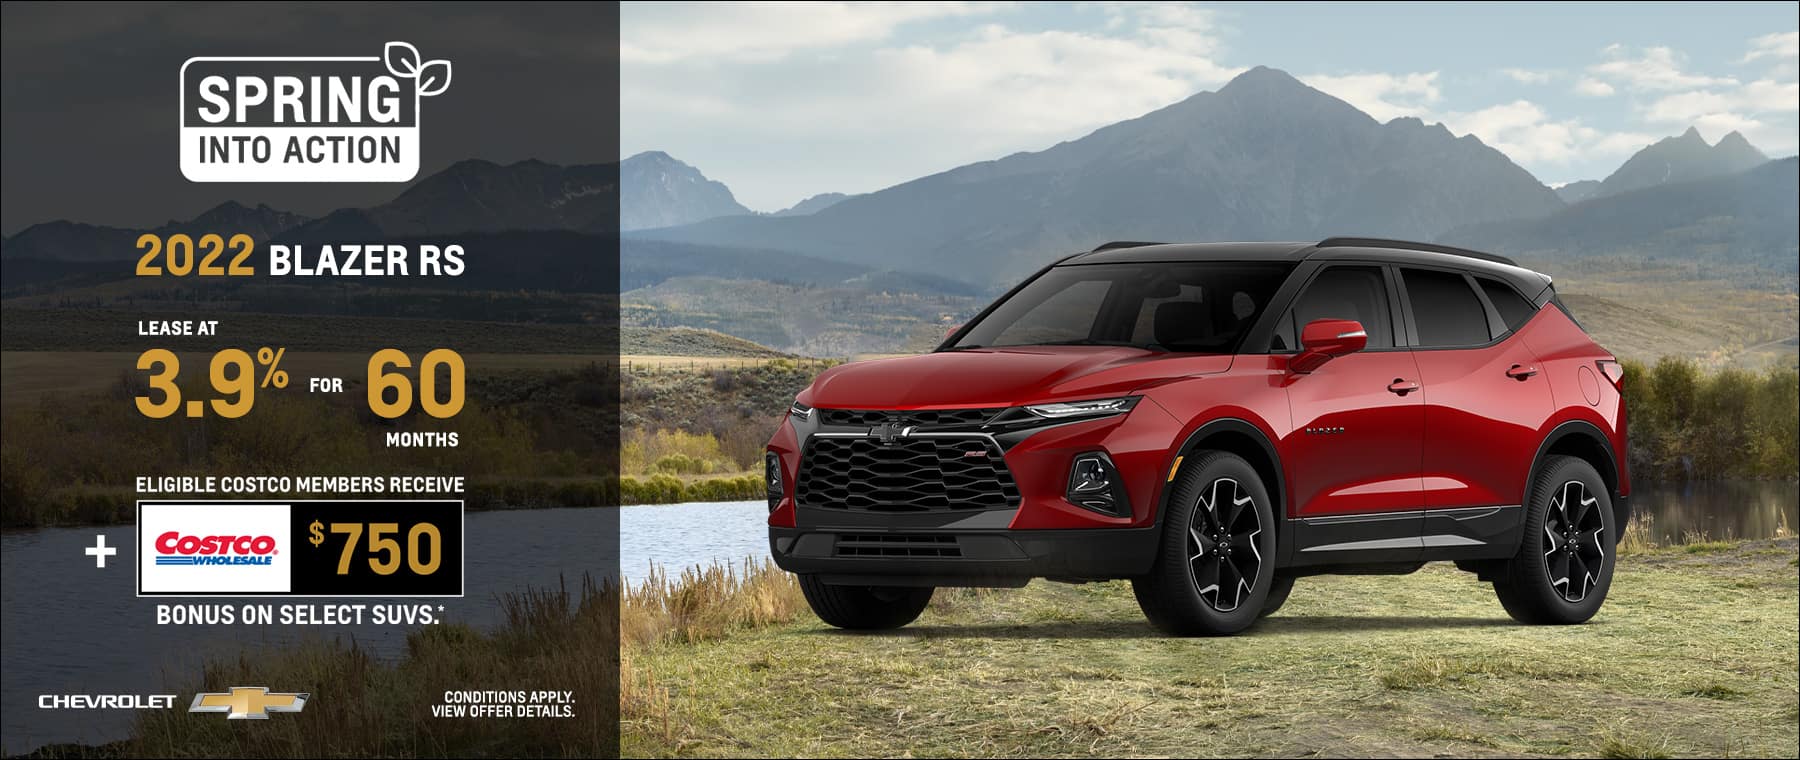 2022_MAY_WST_Chevy_T3_EN_1800x760_BLAZER_ROBC_ABPR